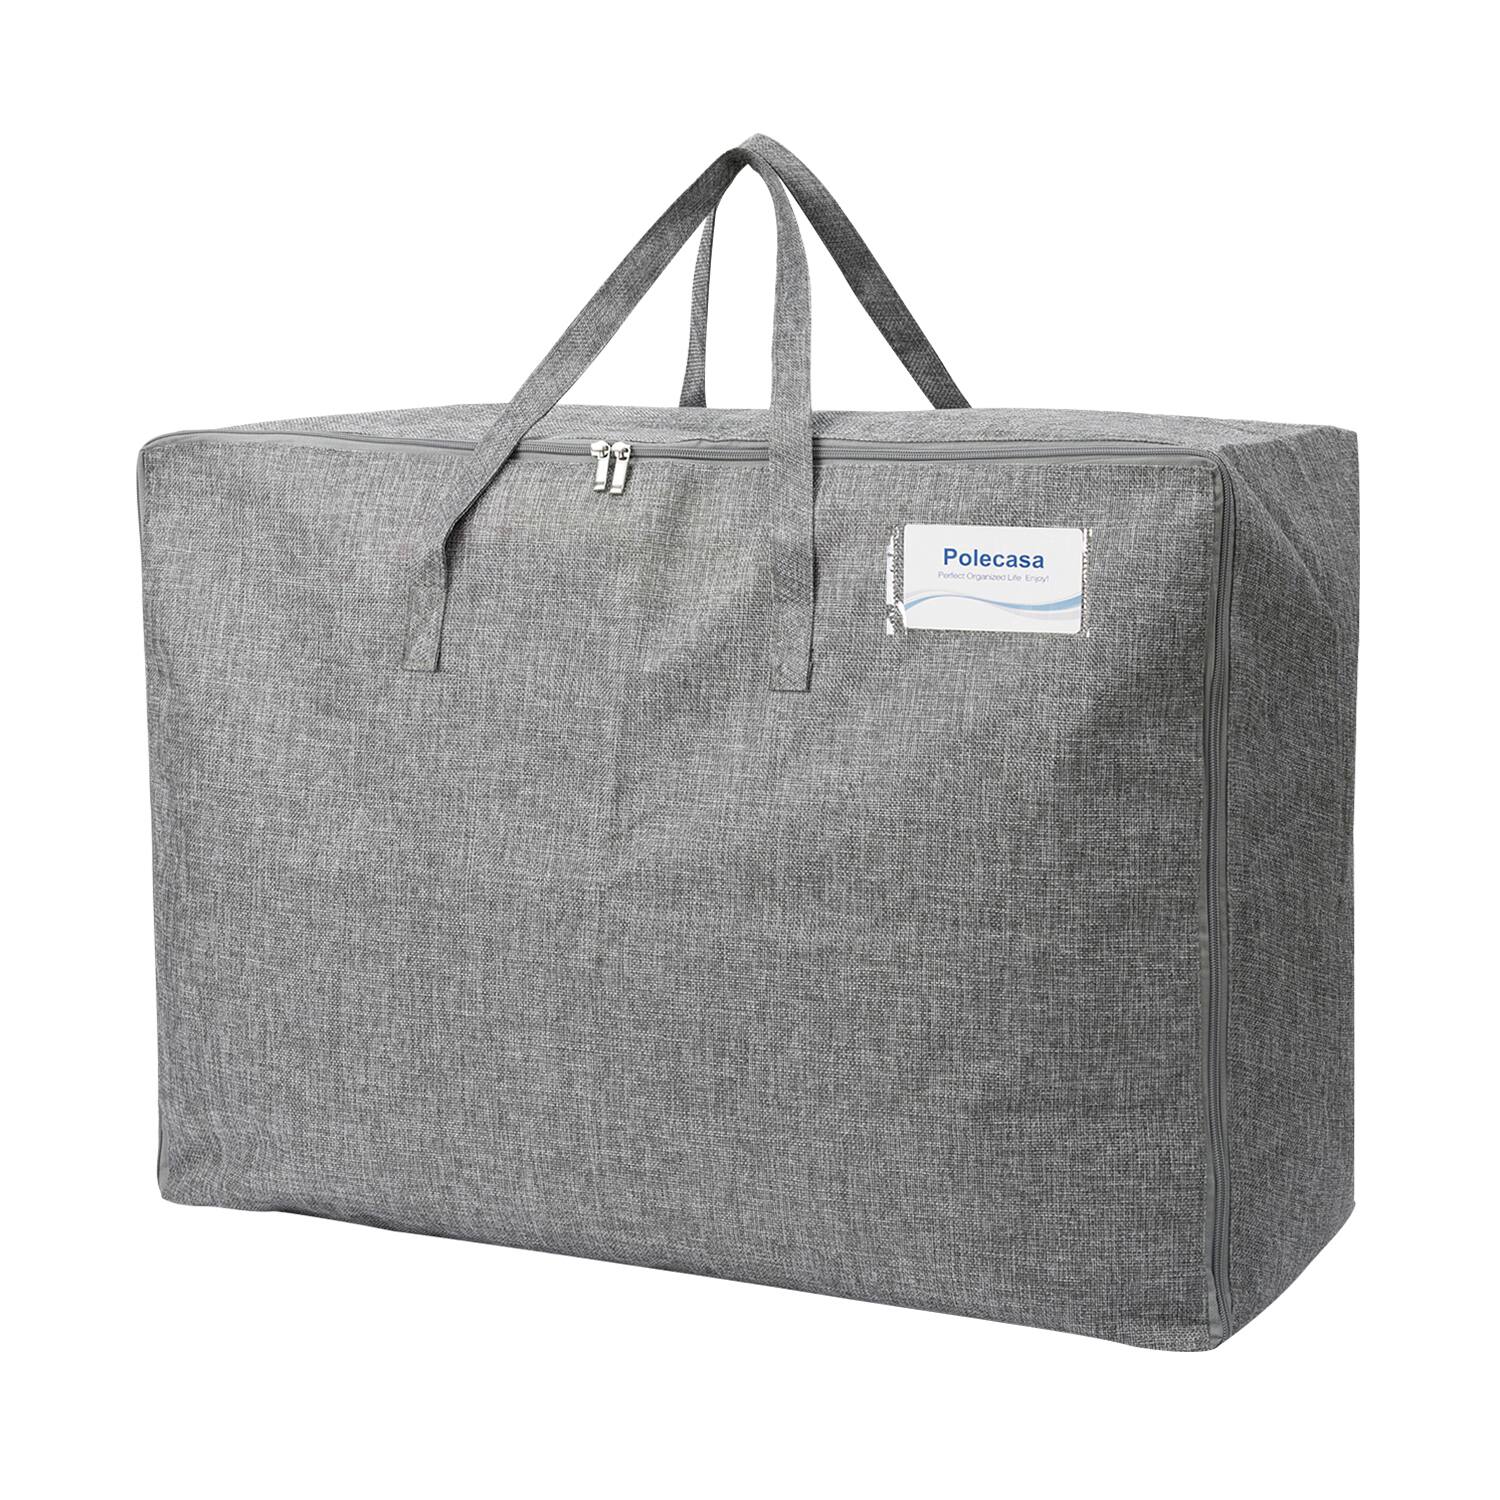 105L Extra Large Storage Bag $6.99 + Free Shipping w/ Prime or $25+